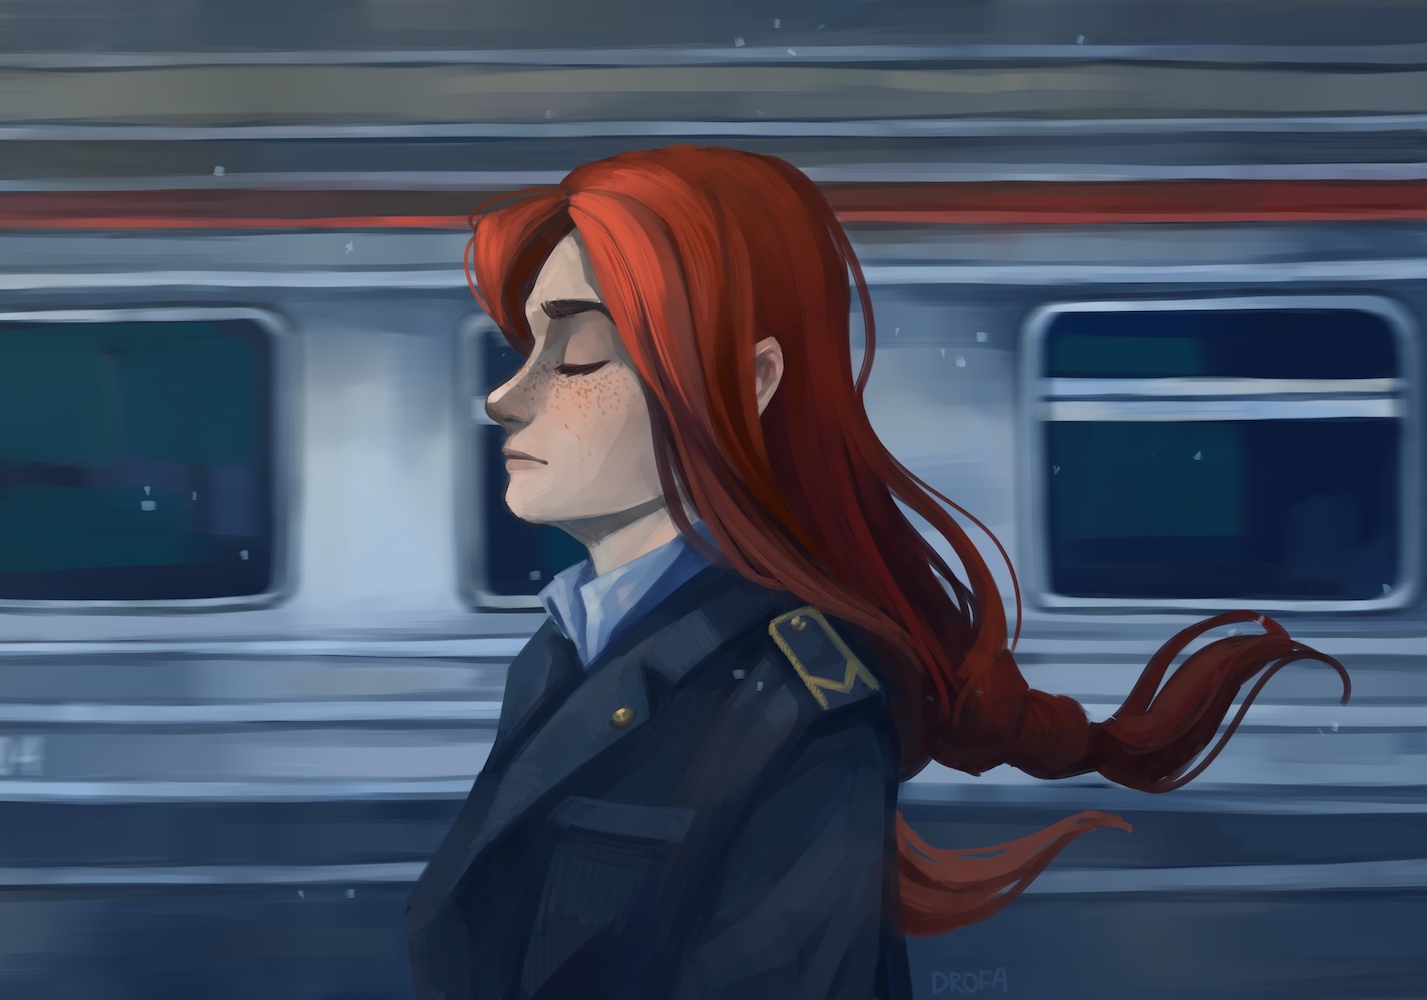 Russia’s first female train conductor drew her dream job in anime illustrations 